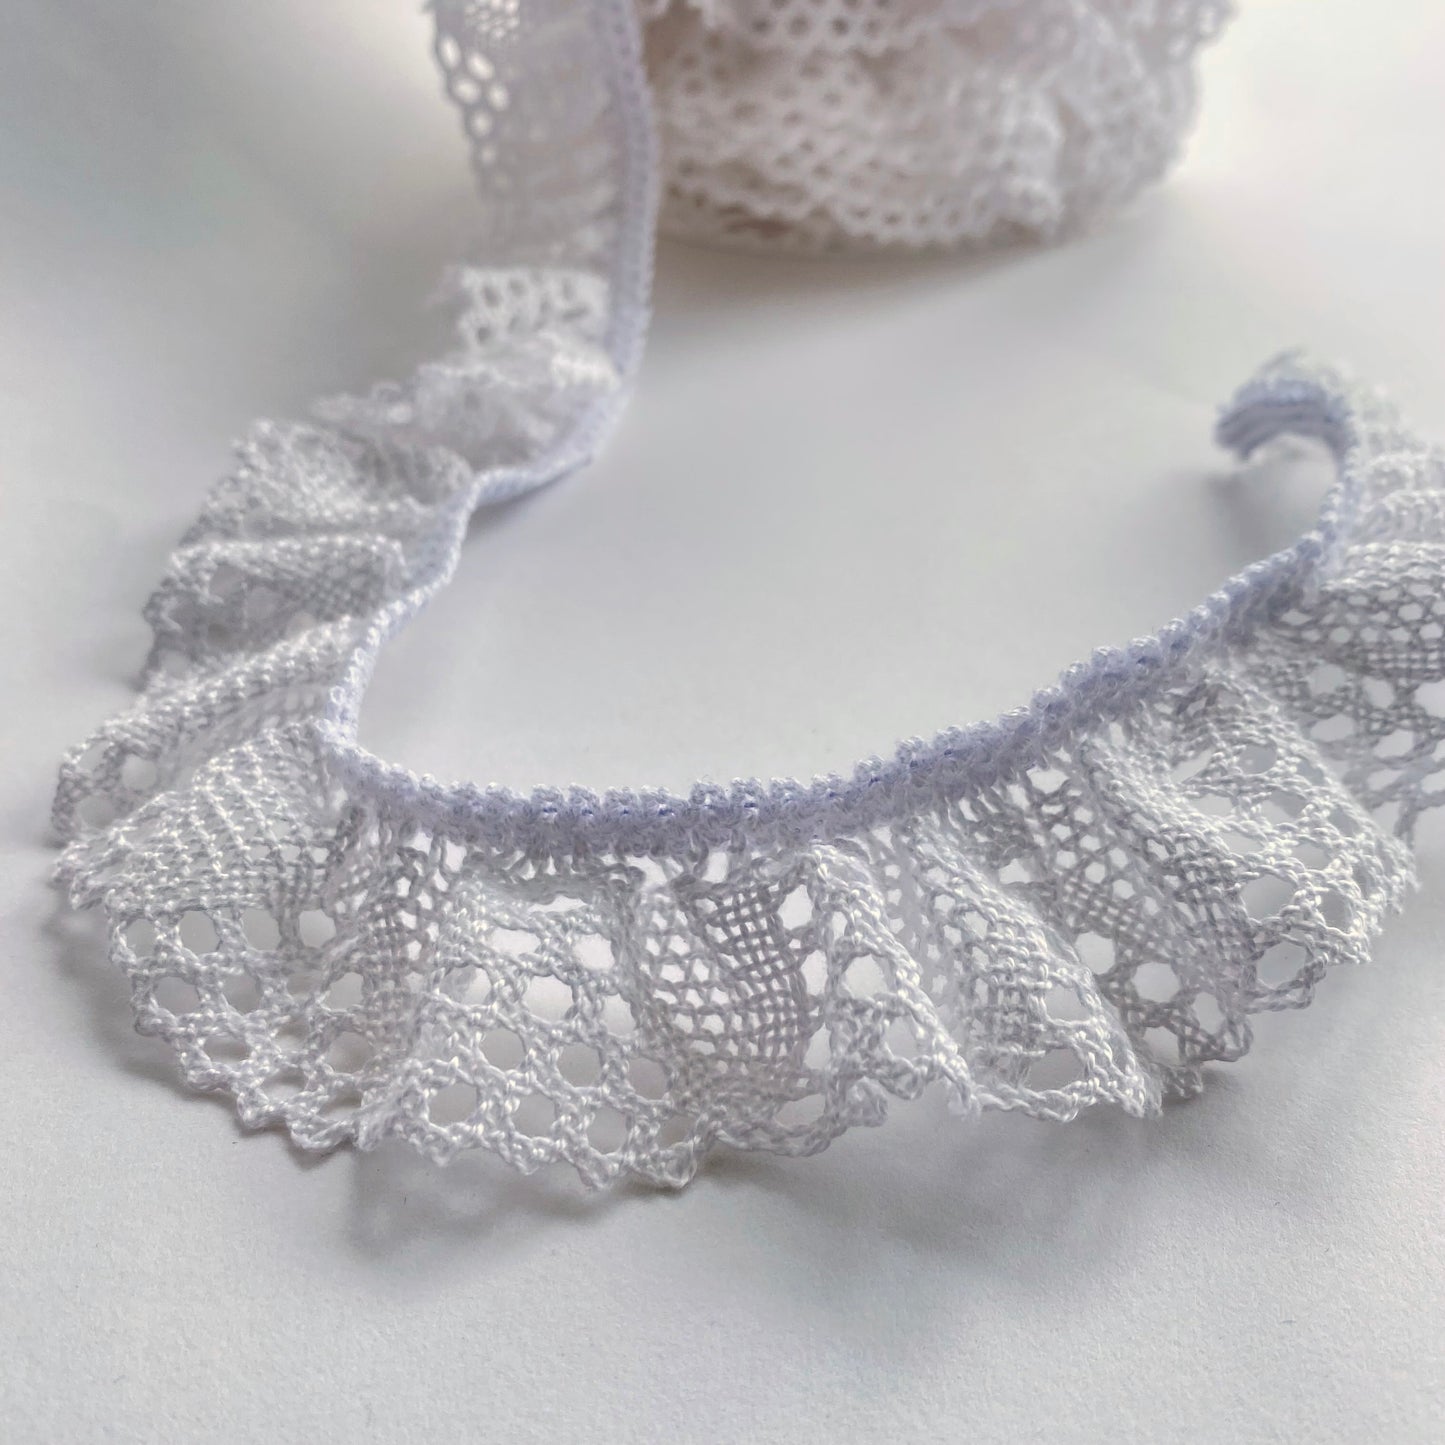 40mm wide Ruffled Cluny, macramé, crochet lace trim with a stretchy edge. This lace is eco friendly as the cotton is Oeko Tex 'Made in Green' standard.